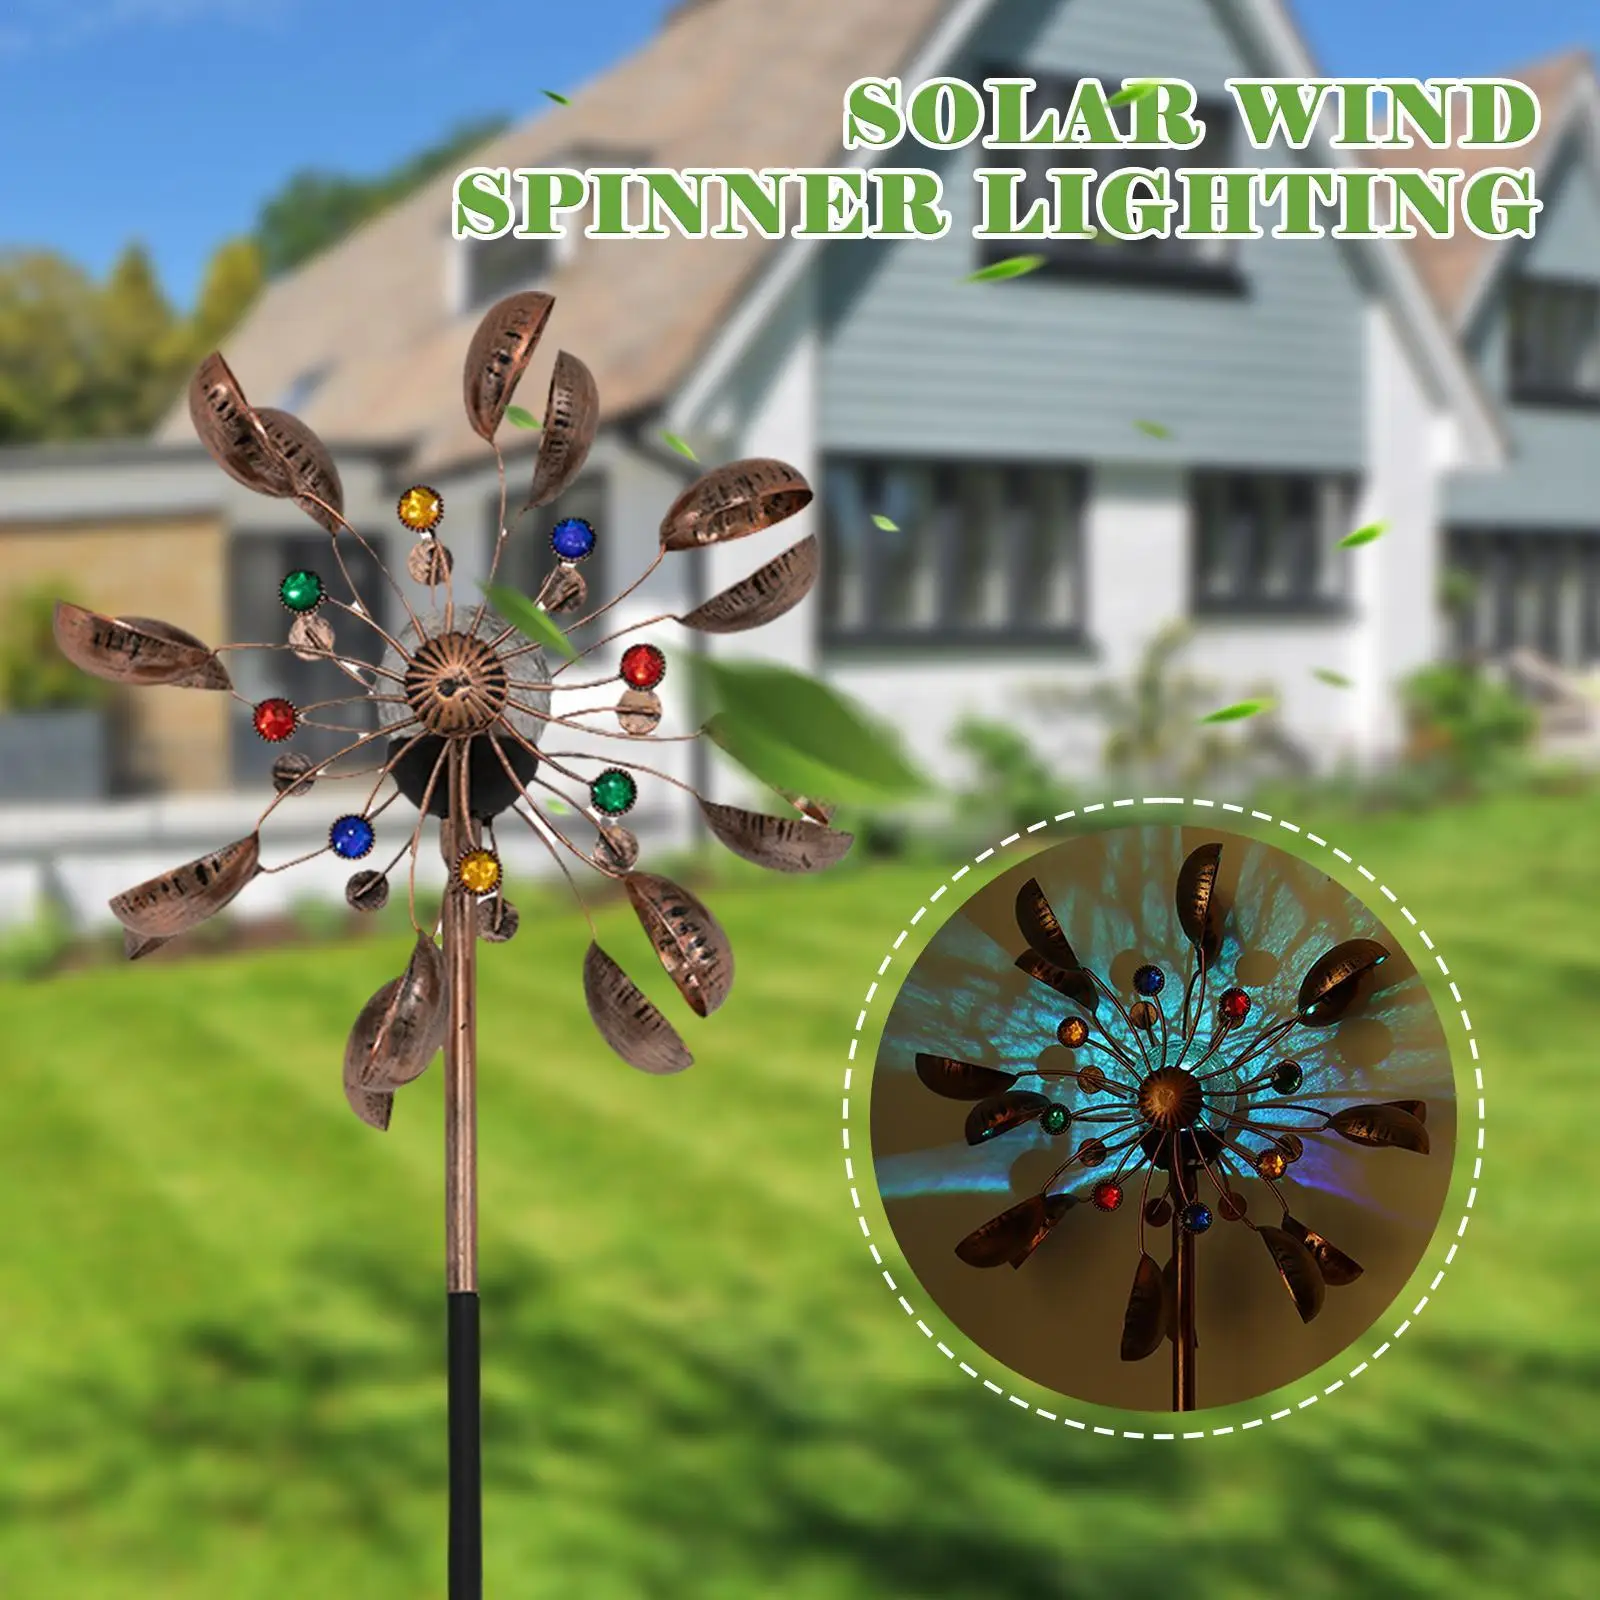 

New Unique And Magical Metal Windmill Outdoor Solar Wind Spinner Lighting Wind Catchers Yard Patio LAwn Garden Decoration Night